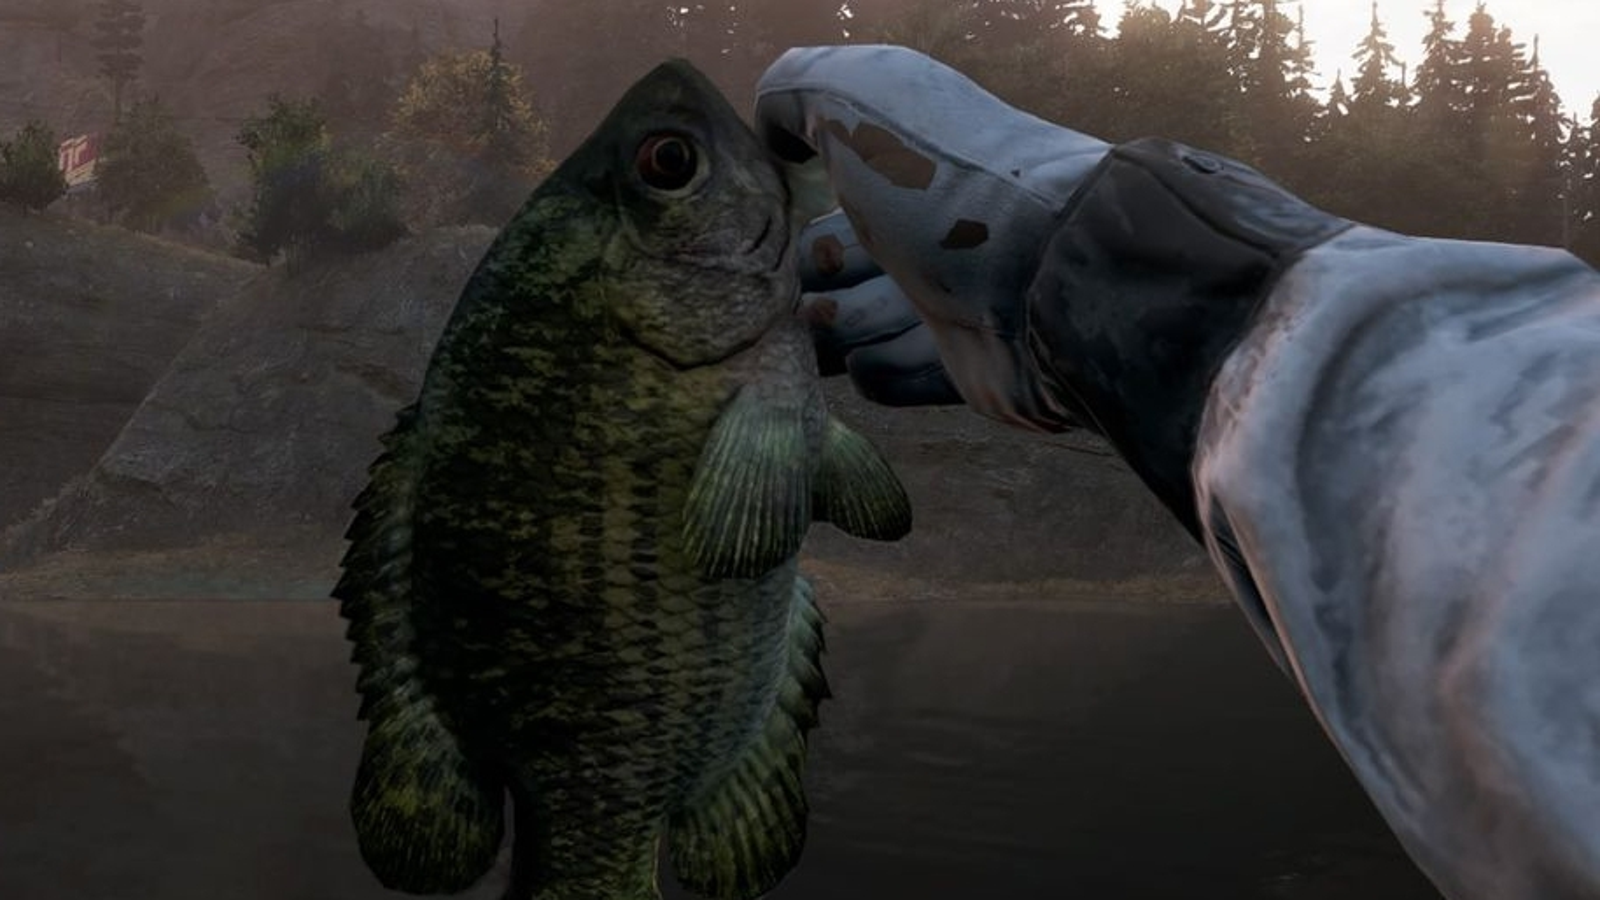 Far Cry 5 The Best Fly-Fishing Simulator Yet - Fly Fisherman